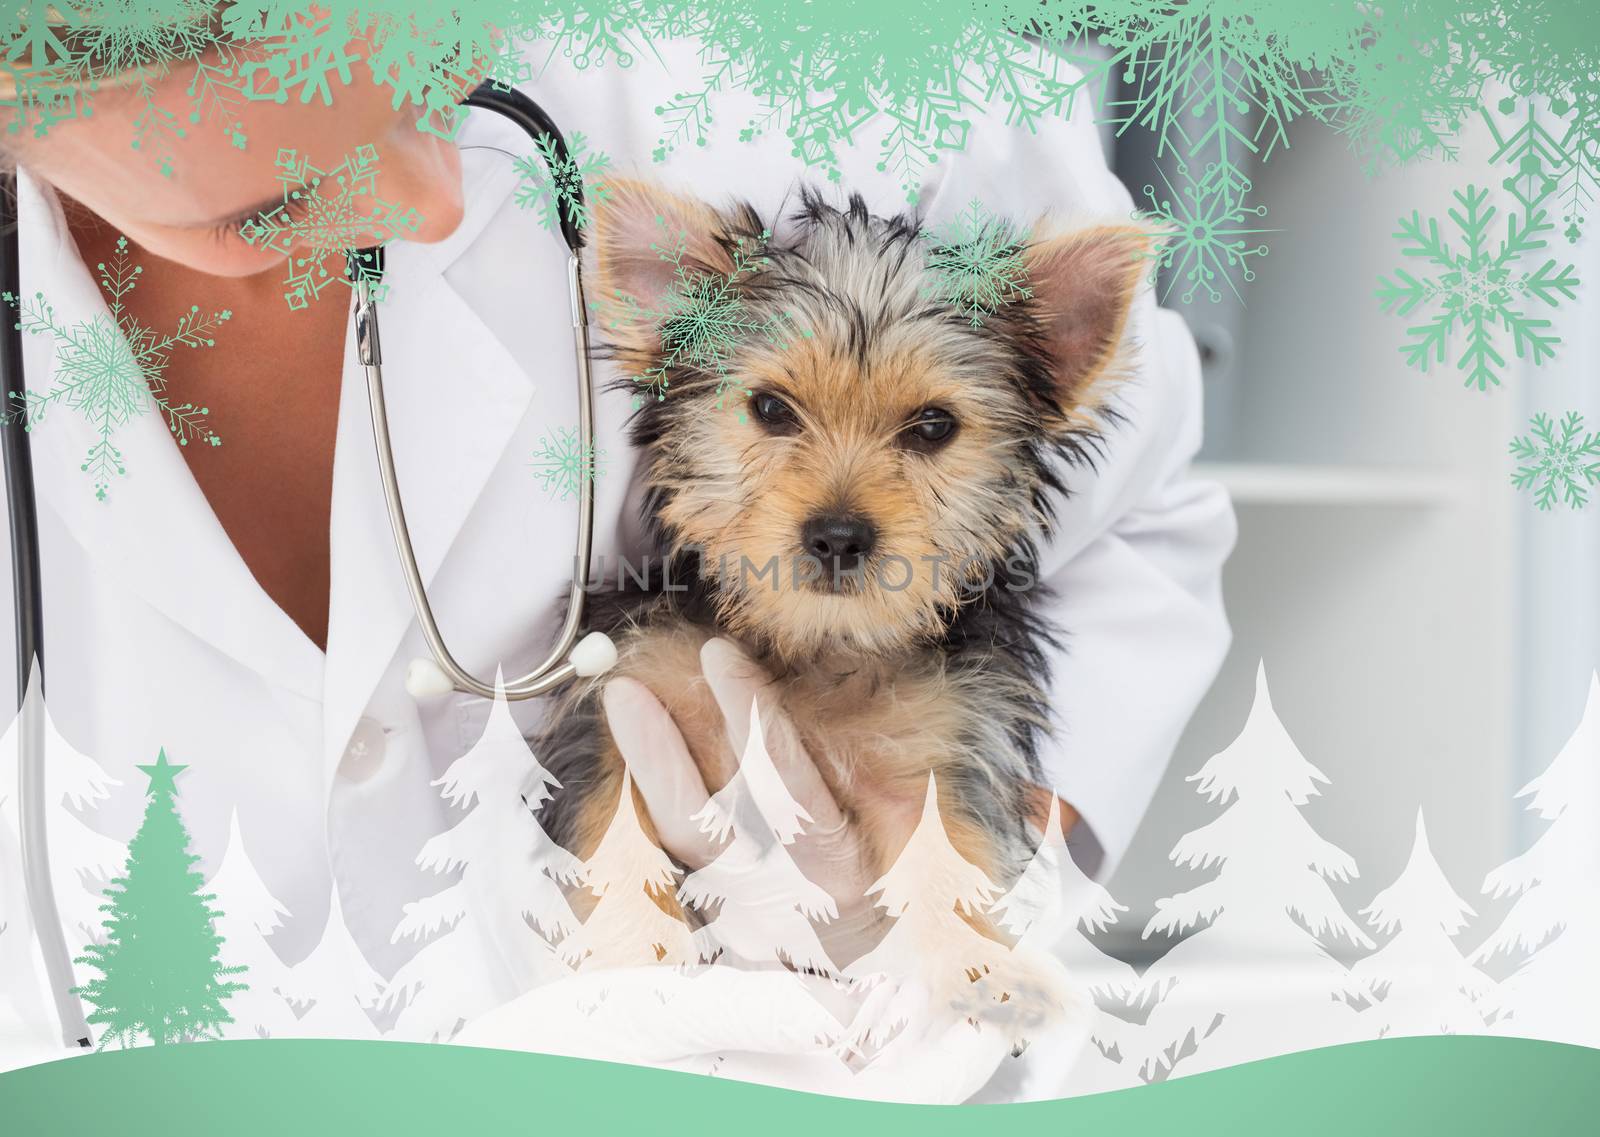 Composite image of vet holding cute puppy against snowflakes and fir tree in green